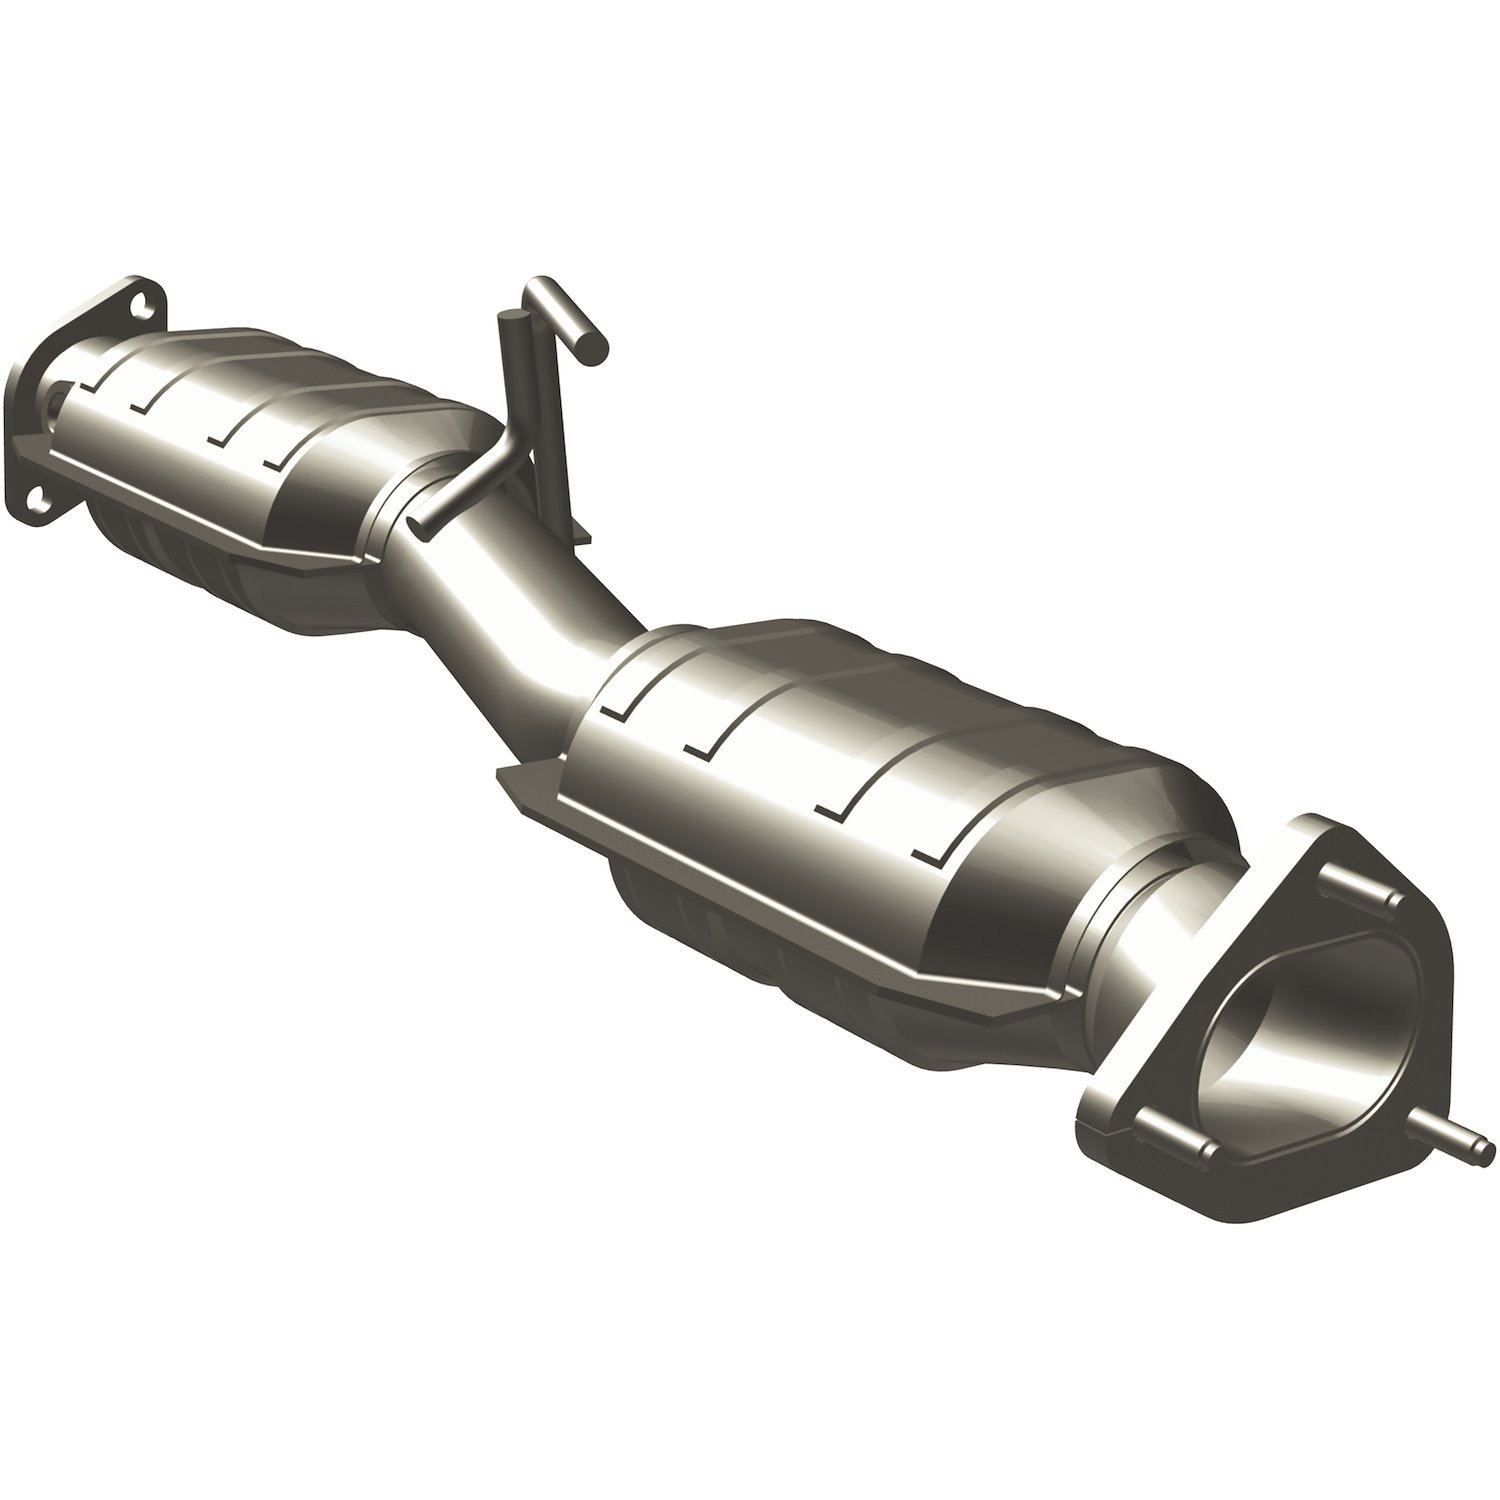 1999-2000 Ford Explorer OEM Grade Federal / EPA Compliant Direct-Fit Catalytic Converter